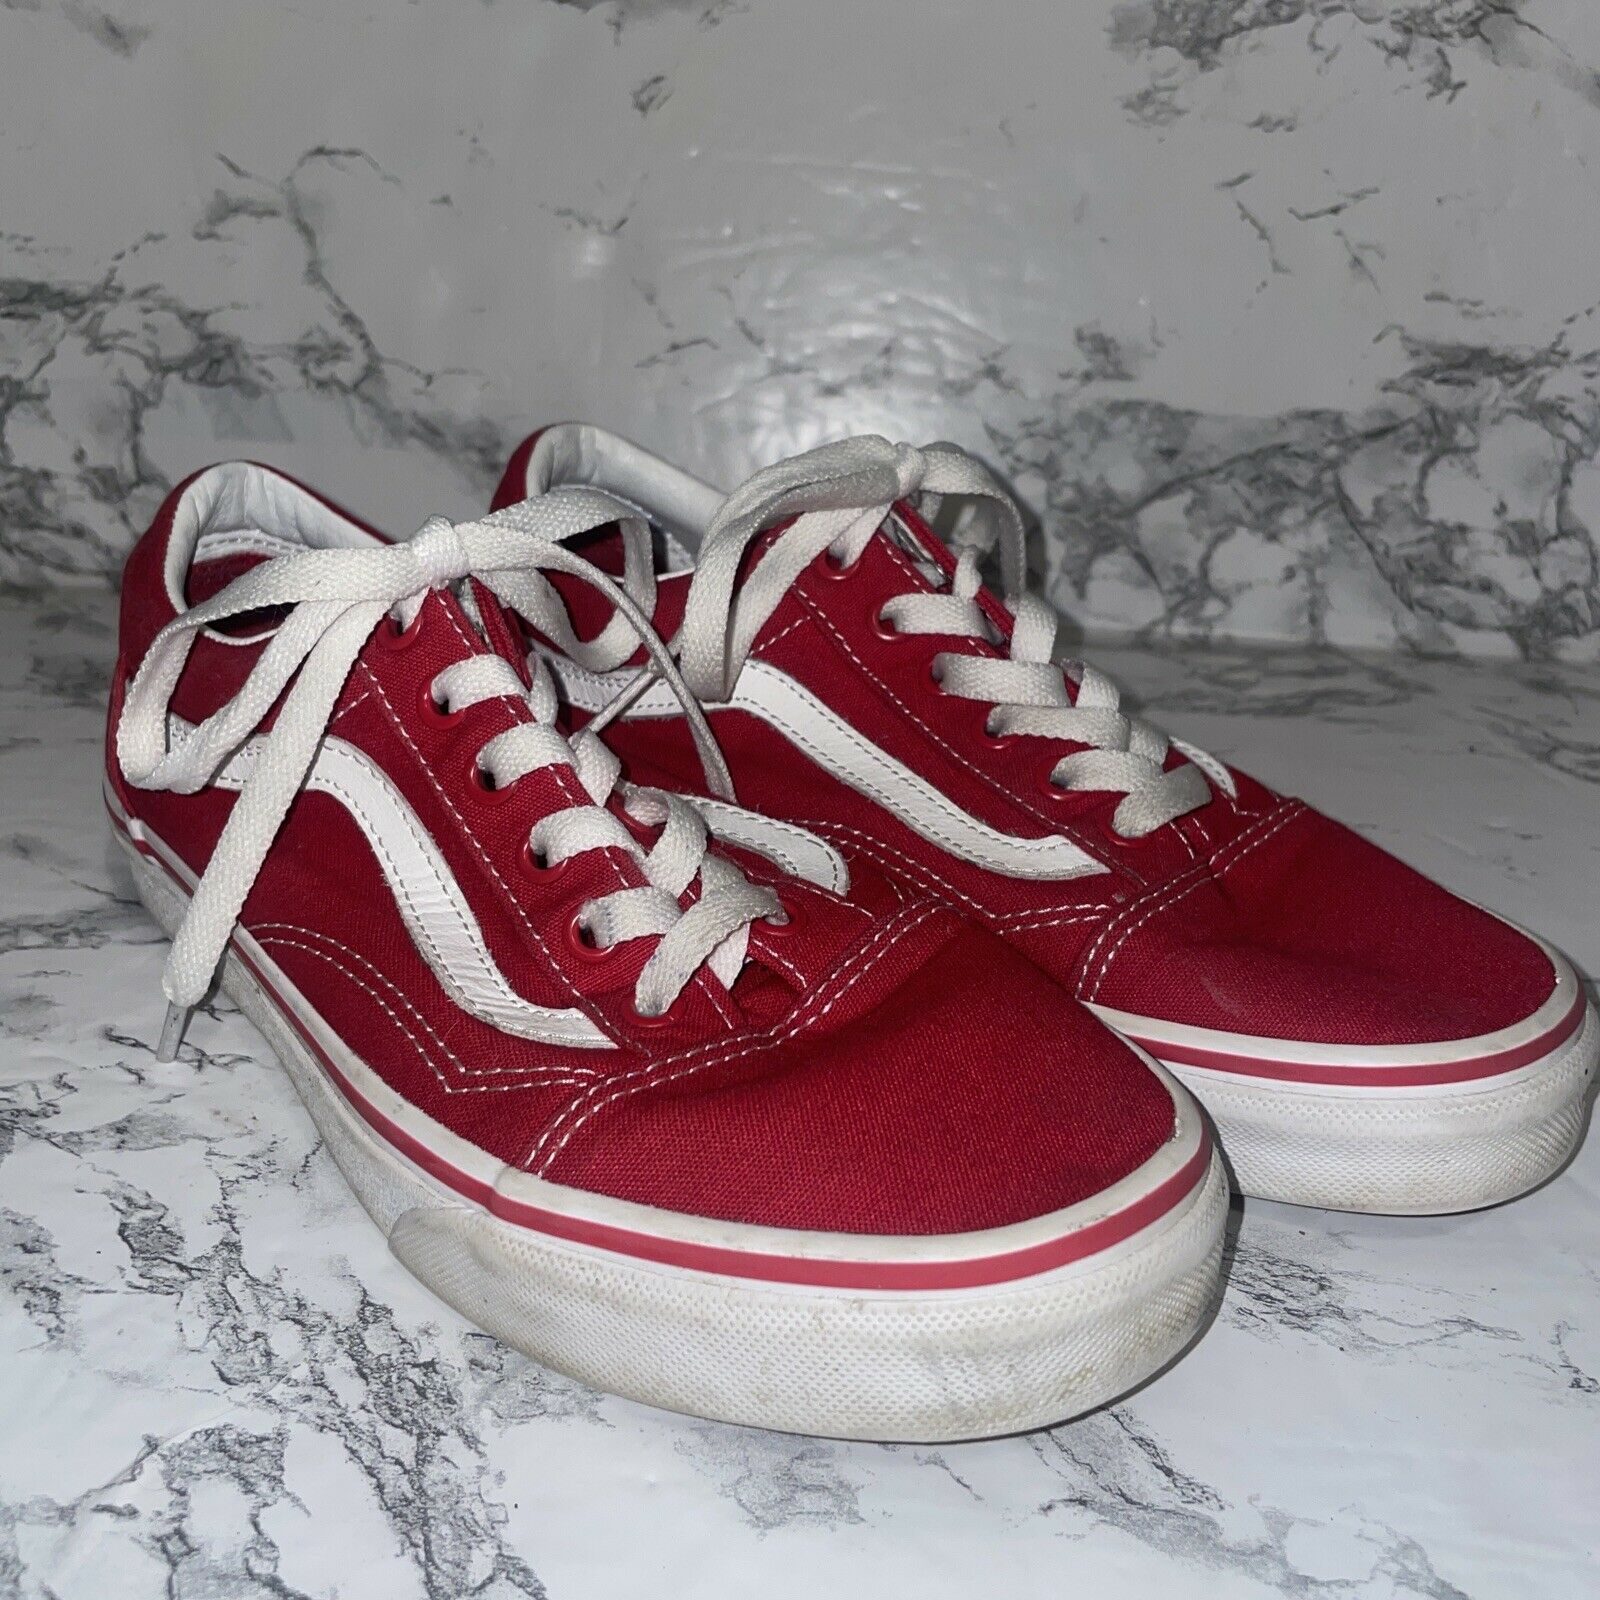 VANS OLD SKOOL Lows Red White Lace-up Skate Walking Shoes MEN'S SIZE 6